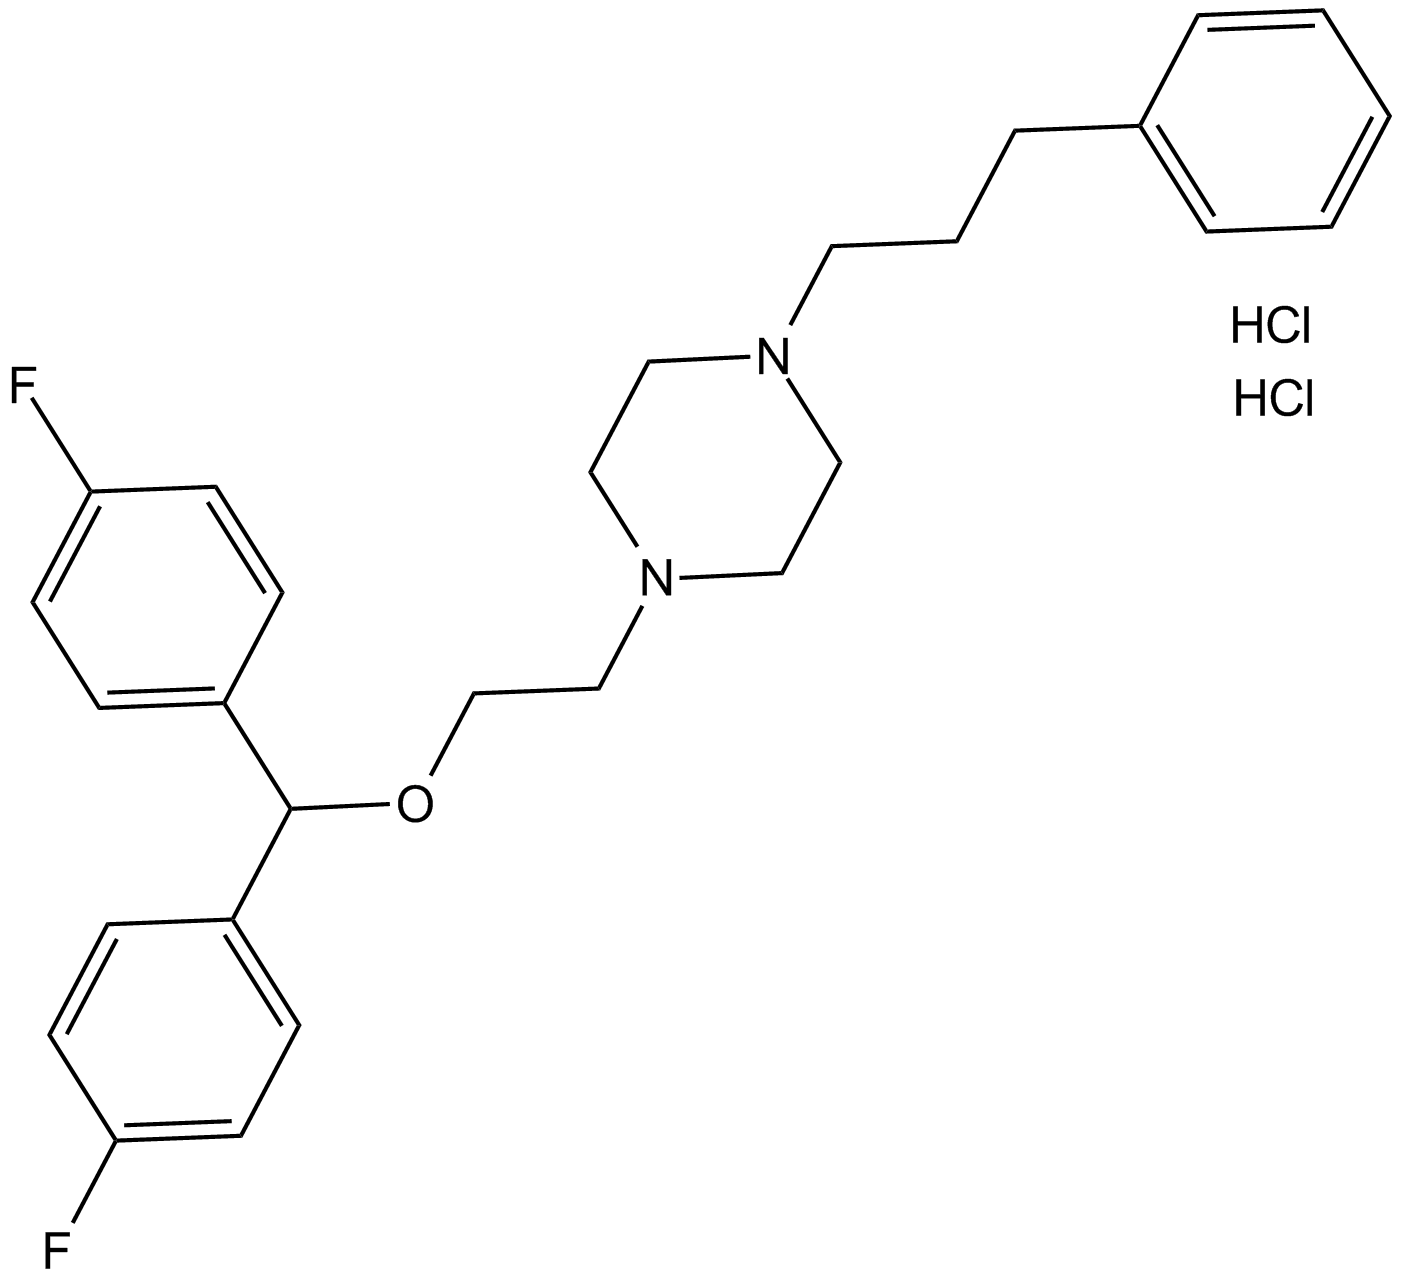 Vanoxerine dihydrochloride  Chemical Structure